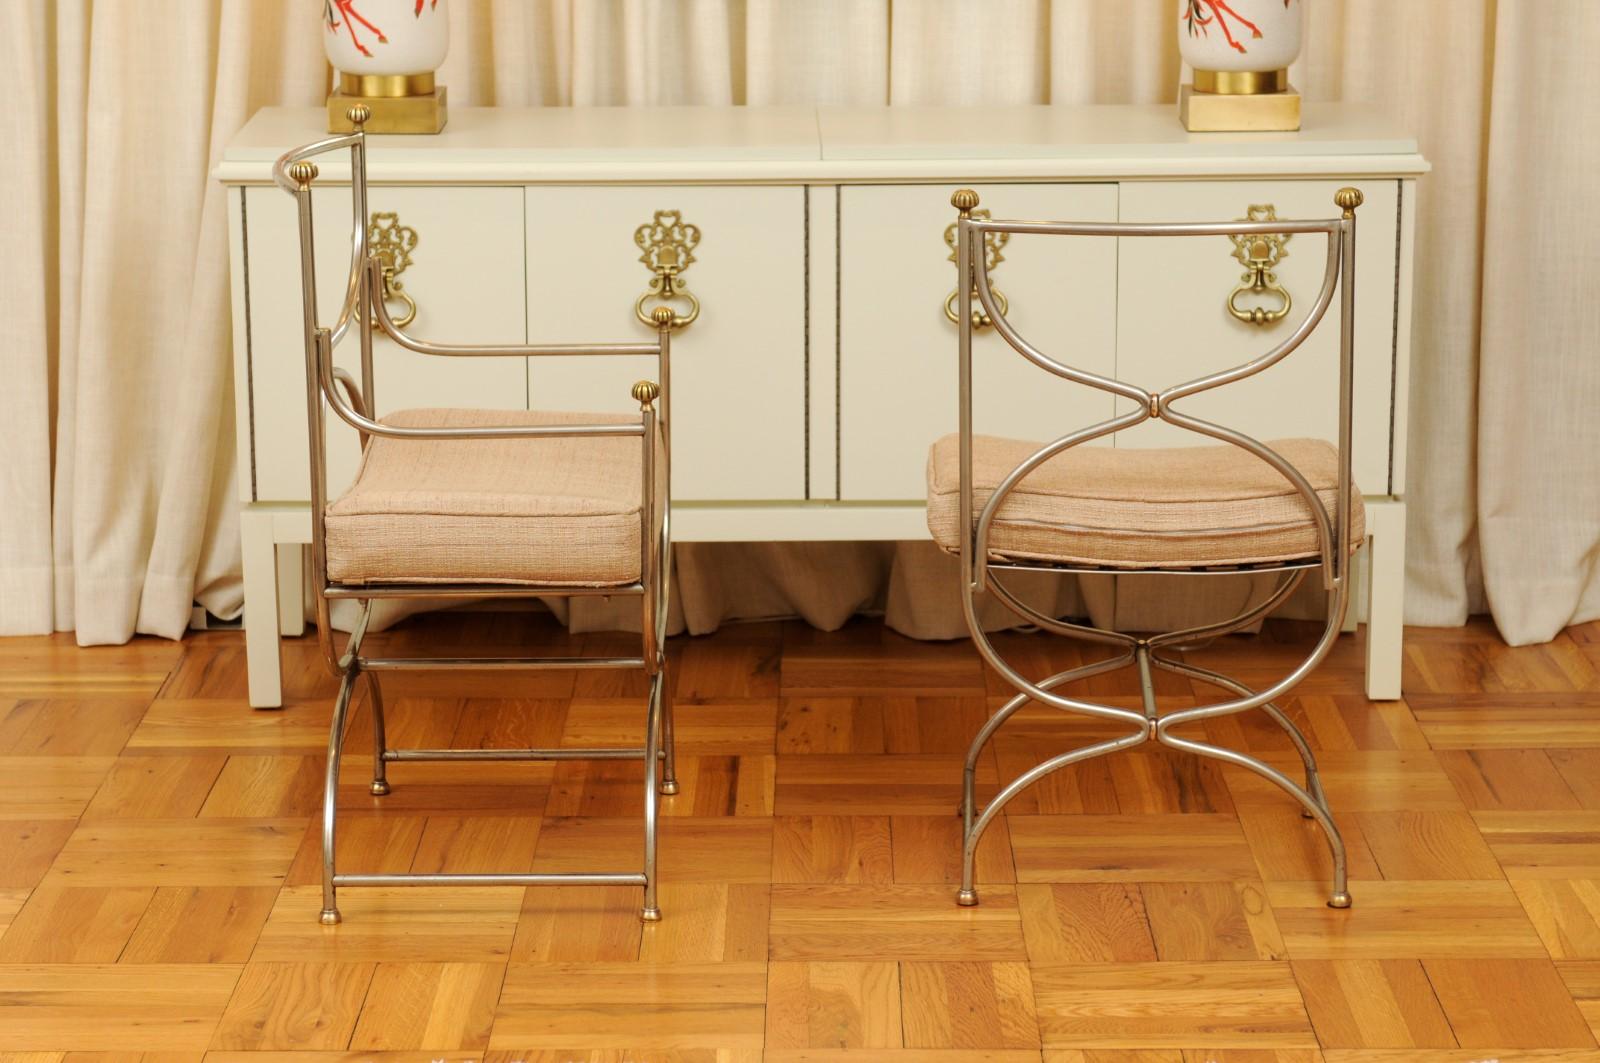 Breathtaking Set of 6 Polished Steel and Brass Chairs by Maison Jansen, 1965 For Sale 4